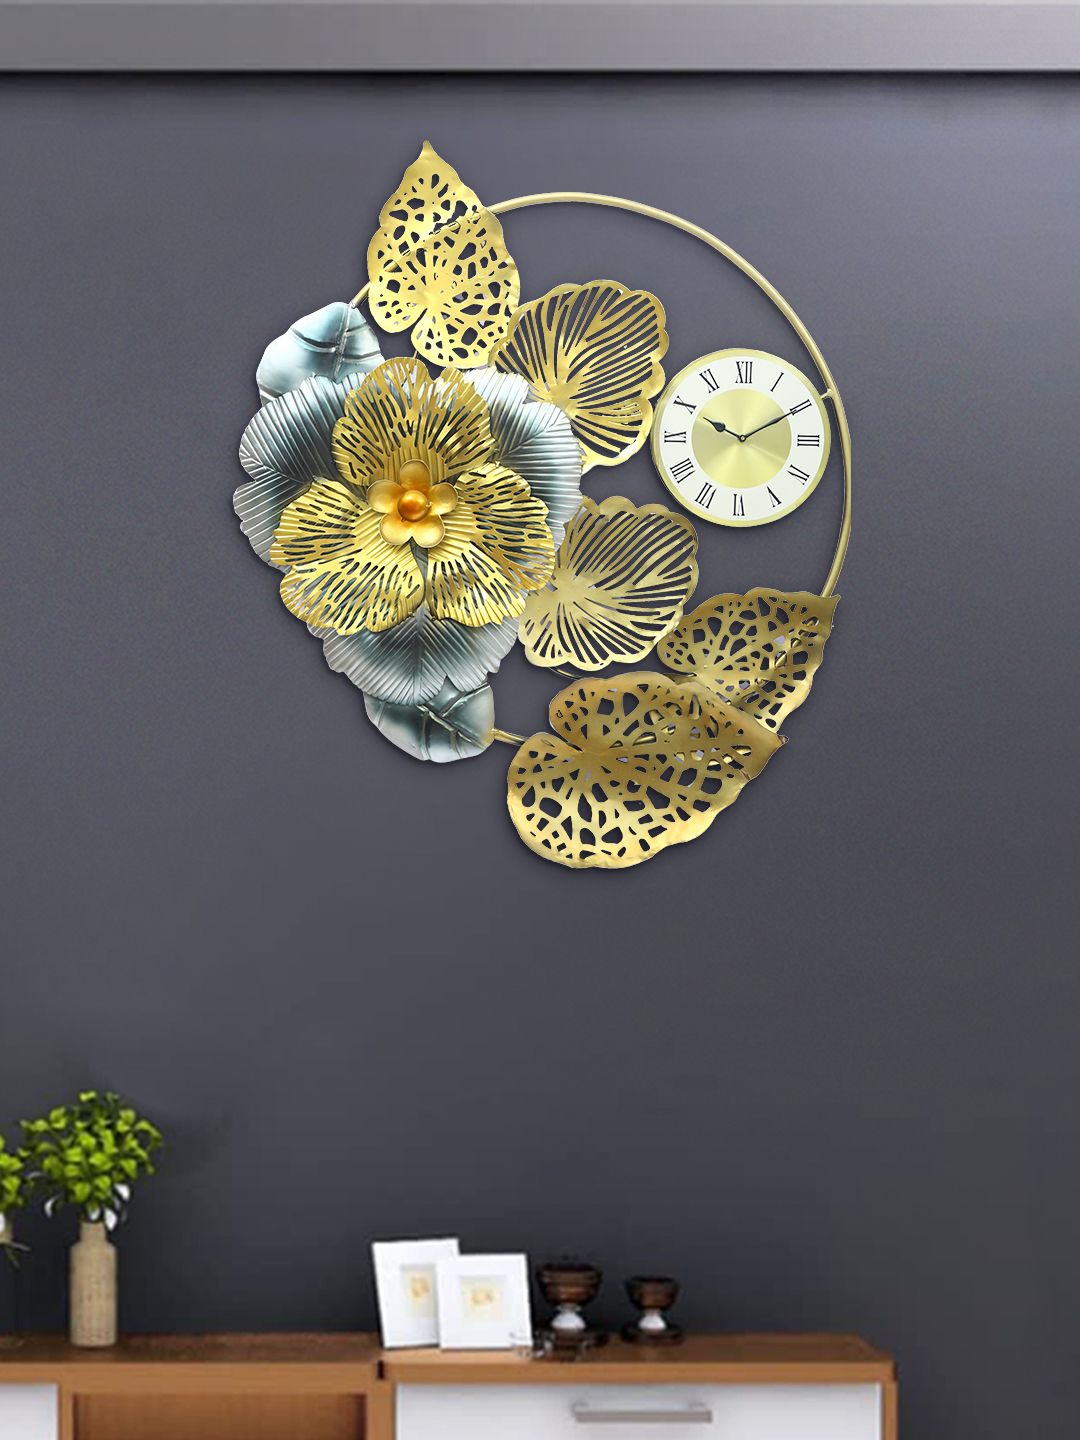 Aapno Rajasthan Gold-Toned Leaf Hanging Wall Clock Price in India